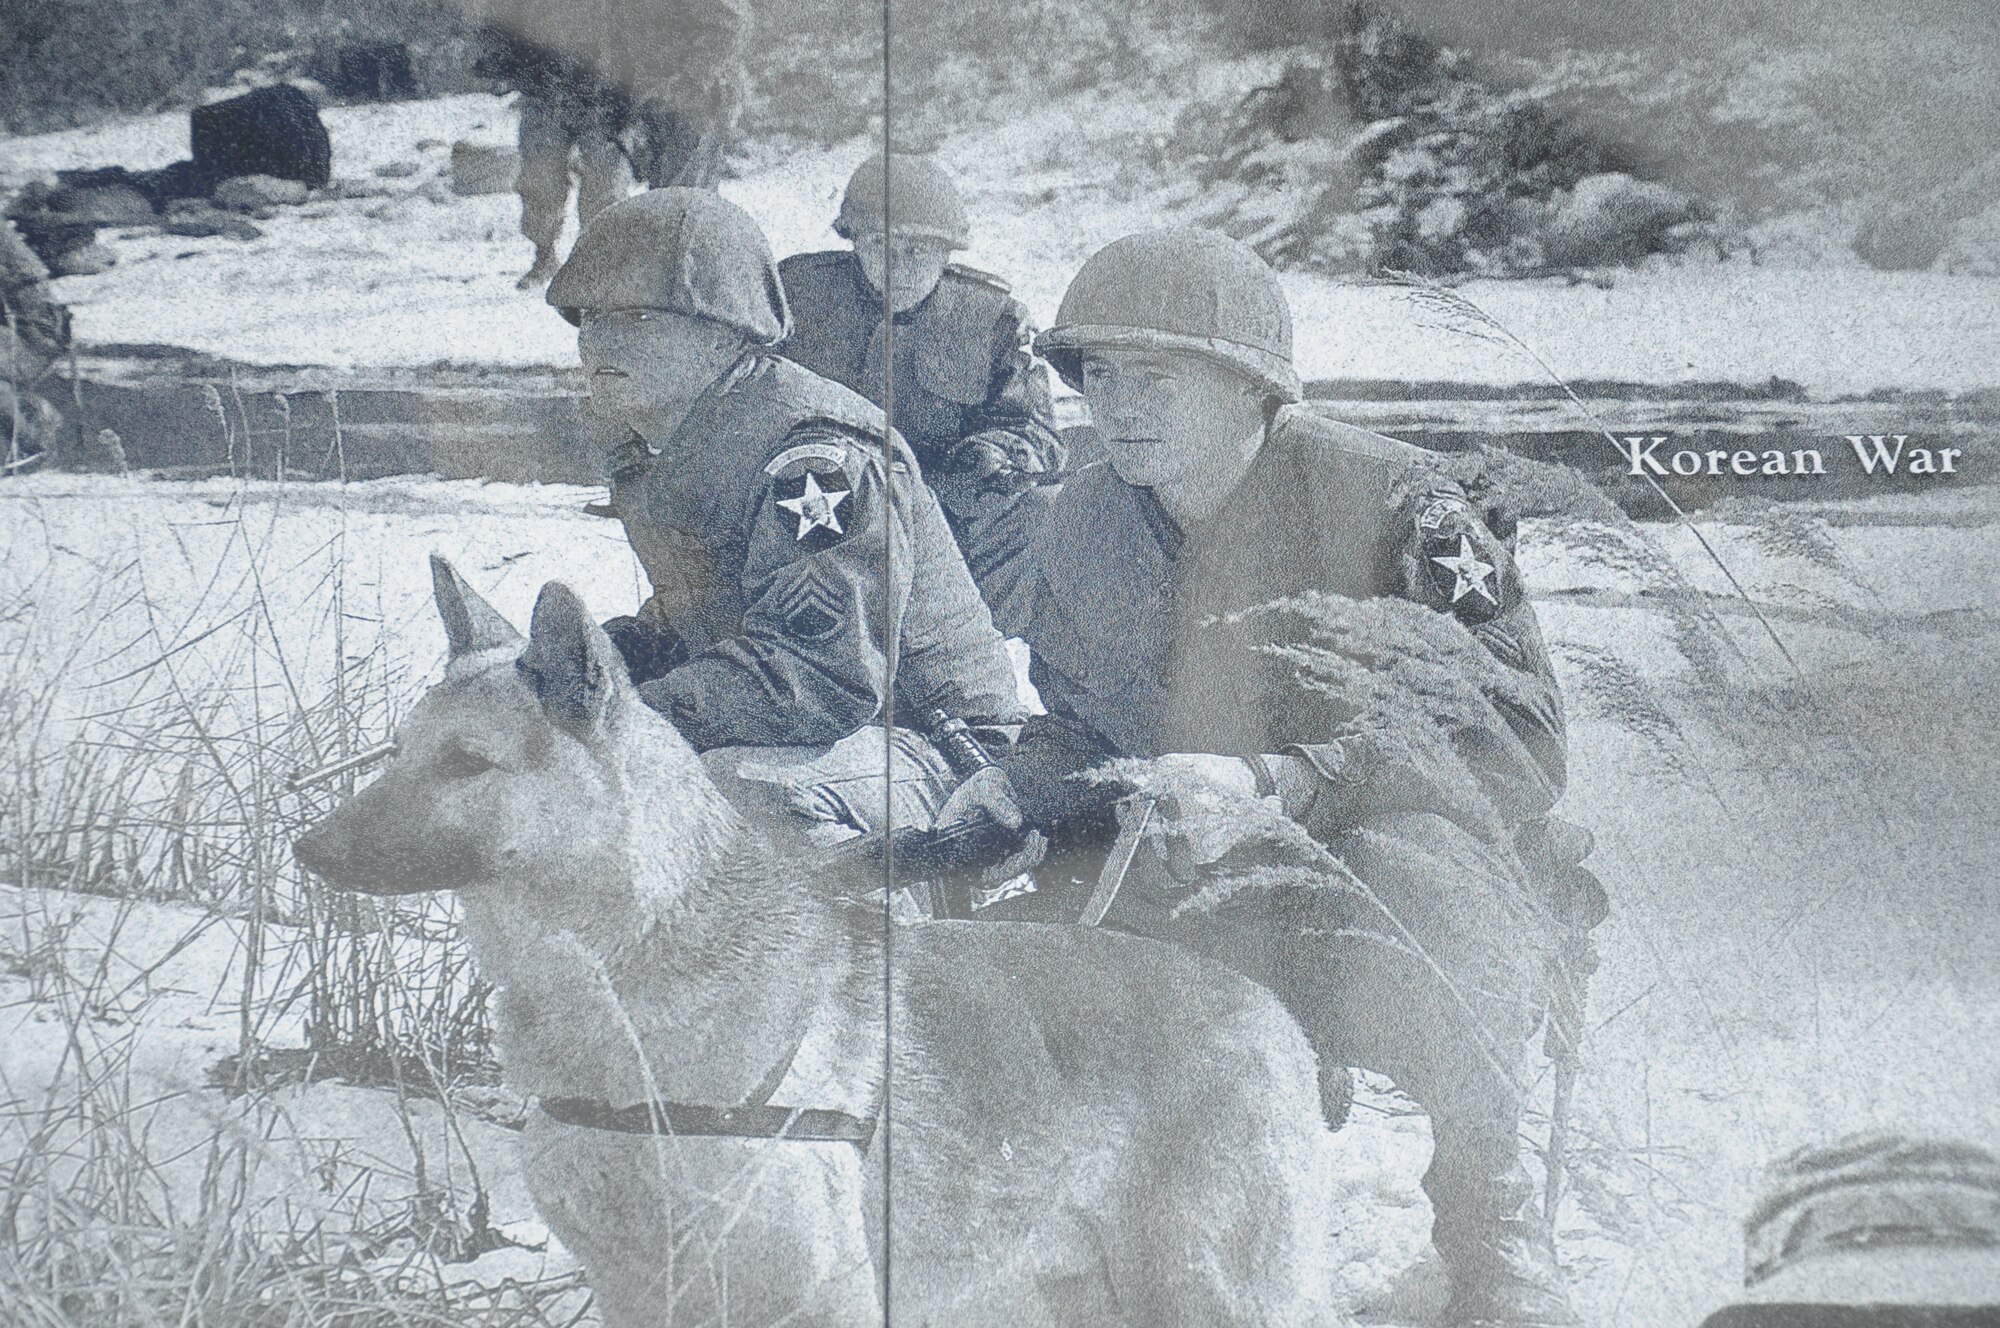 A image taken in the Korean War of a military team with a canine was part of a collection that create a montage that is etched onto the face of the Military Working Dog Teams’ National Monument which was revealed Oct. 28, 2013 at Joint Base San Antonio-Lackland, Texas. The Department of Defense Military Working Dog Program is located at JBSA-Lackland where teams have been trained since 1958. (U.S. Air Force photo by Airman 1st Class Krystal M. Jeffers/Released)